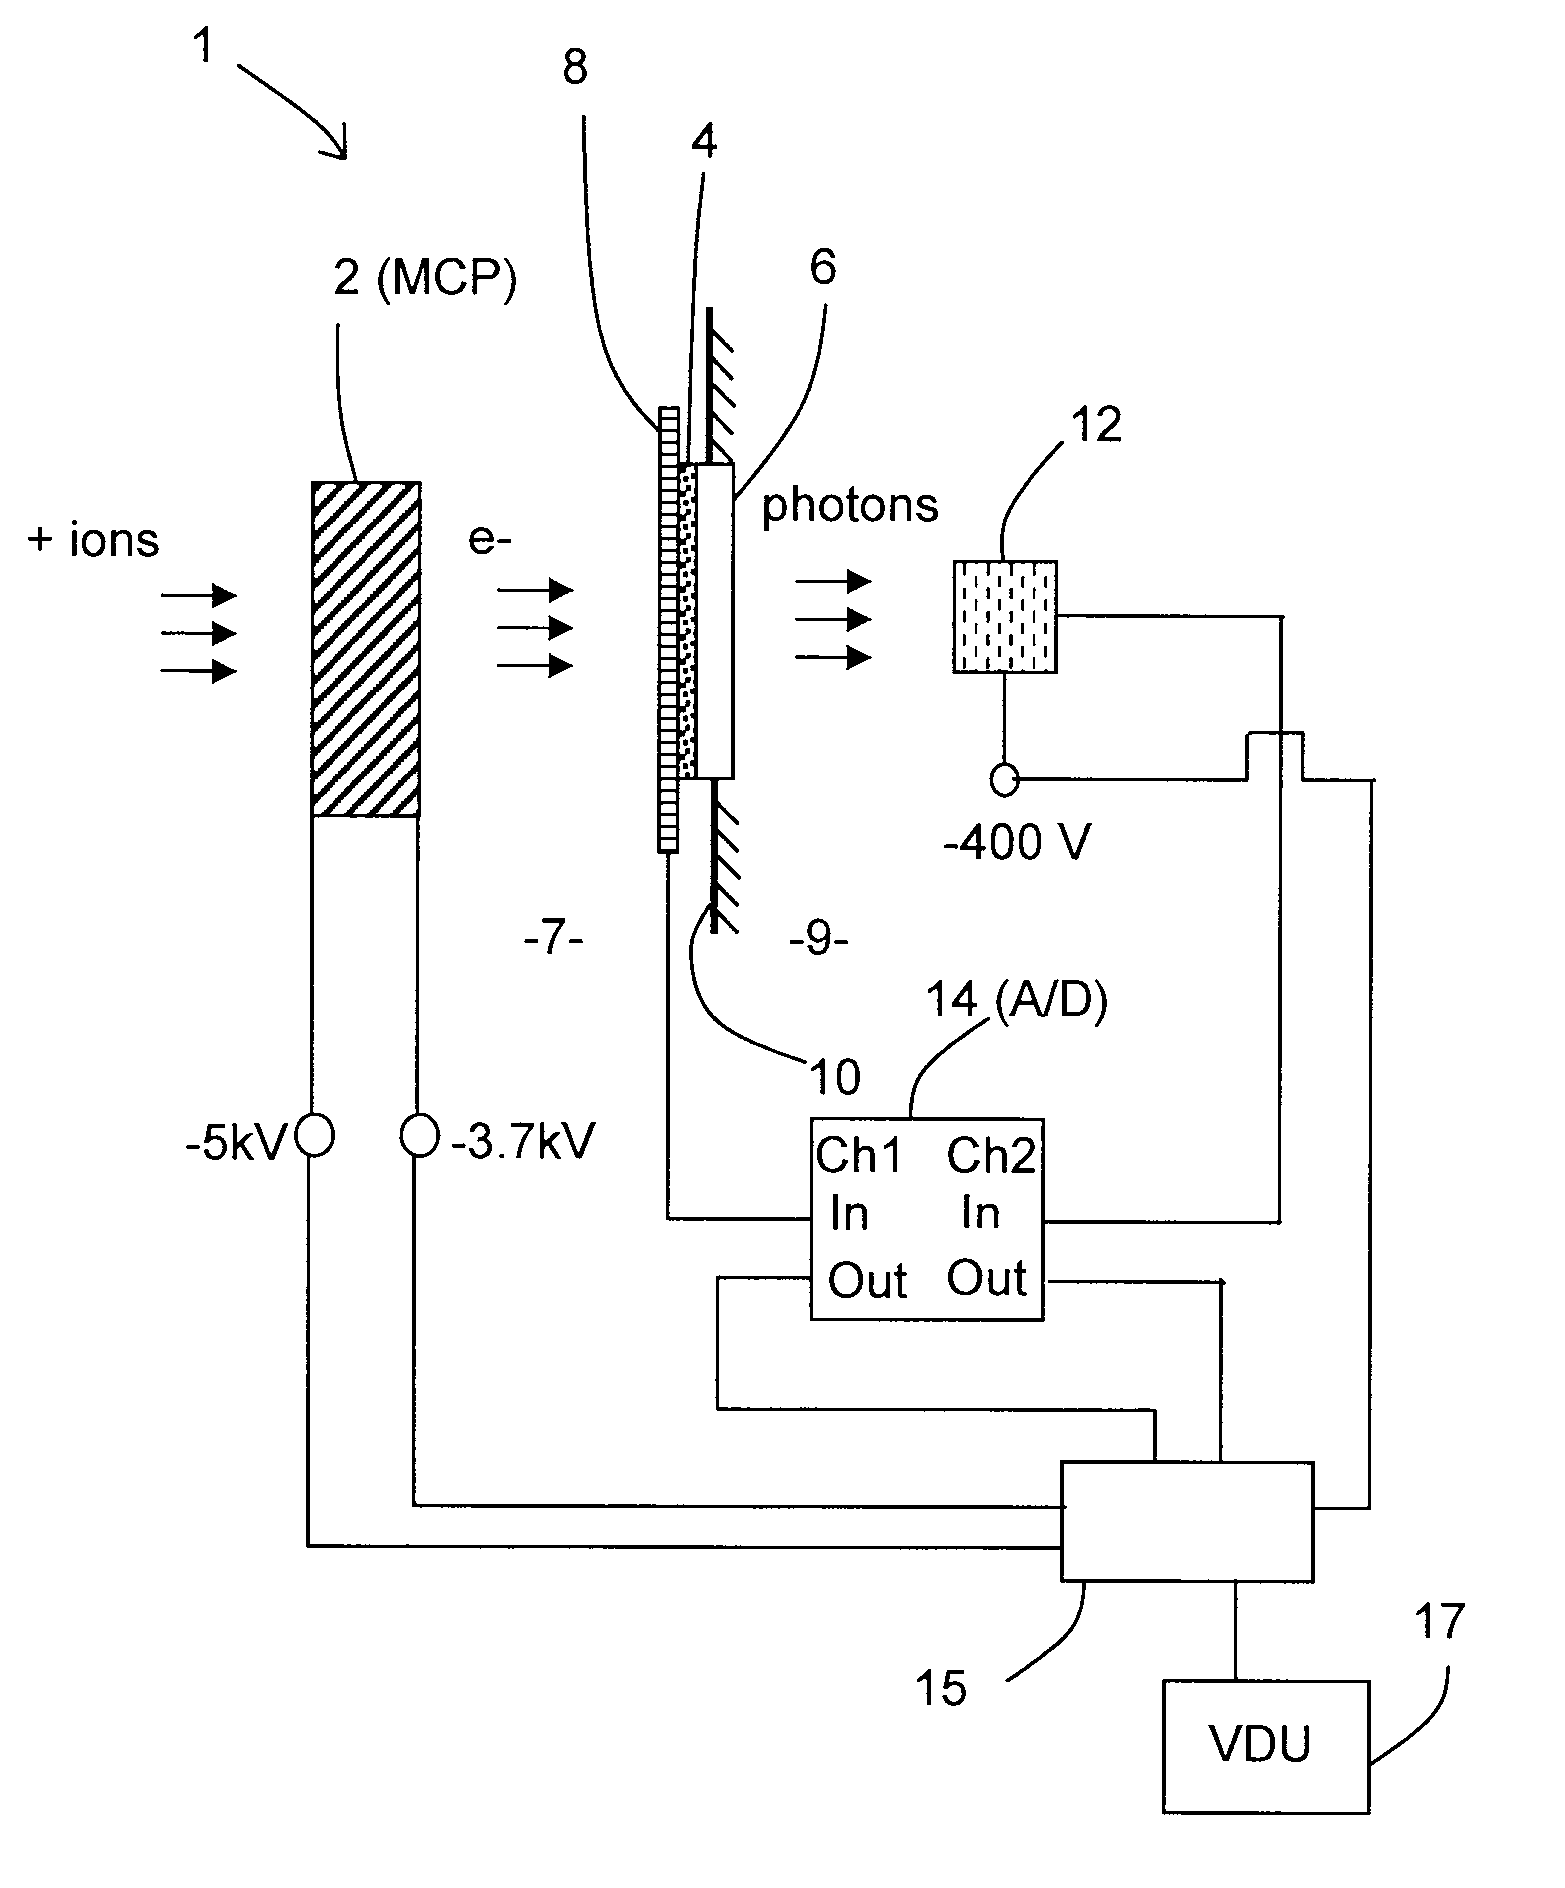 Detection apparatus for detecting charged particles, methods for detecting charged particles and mass spectrometer